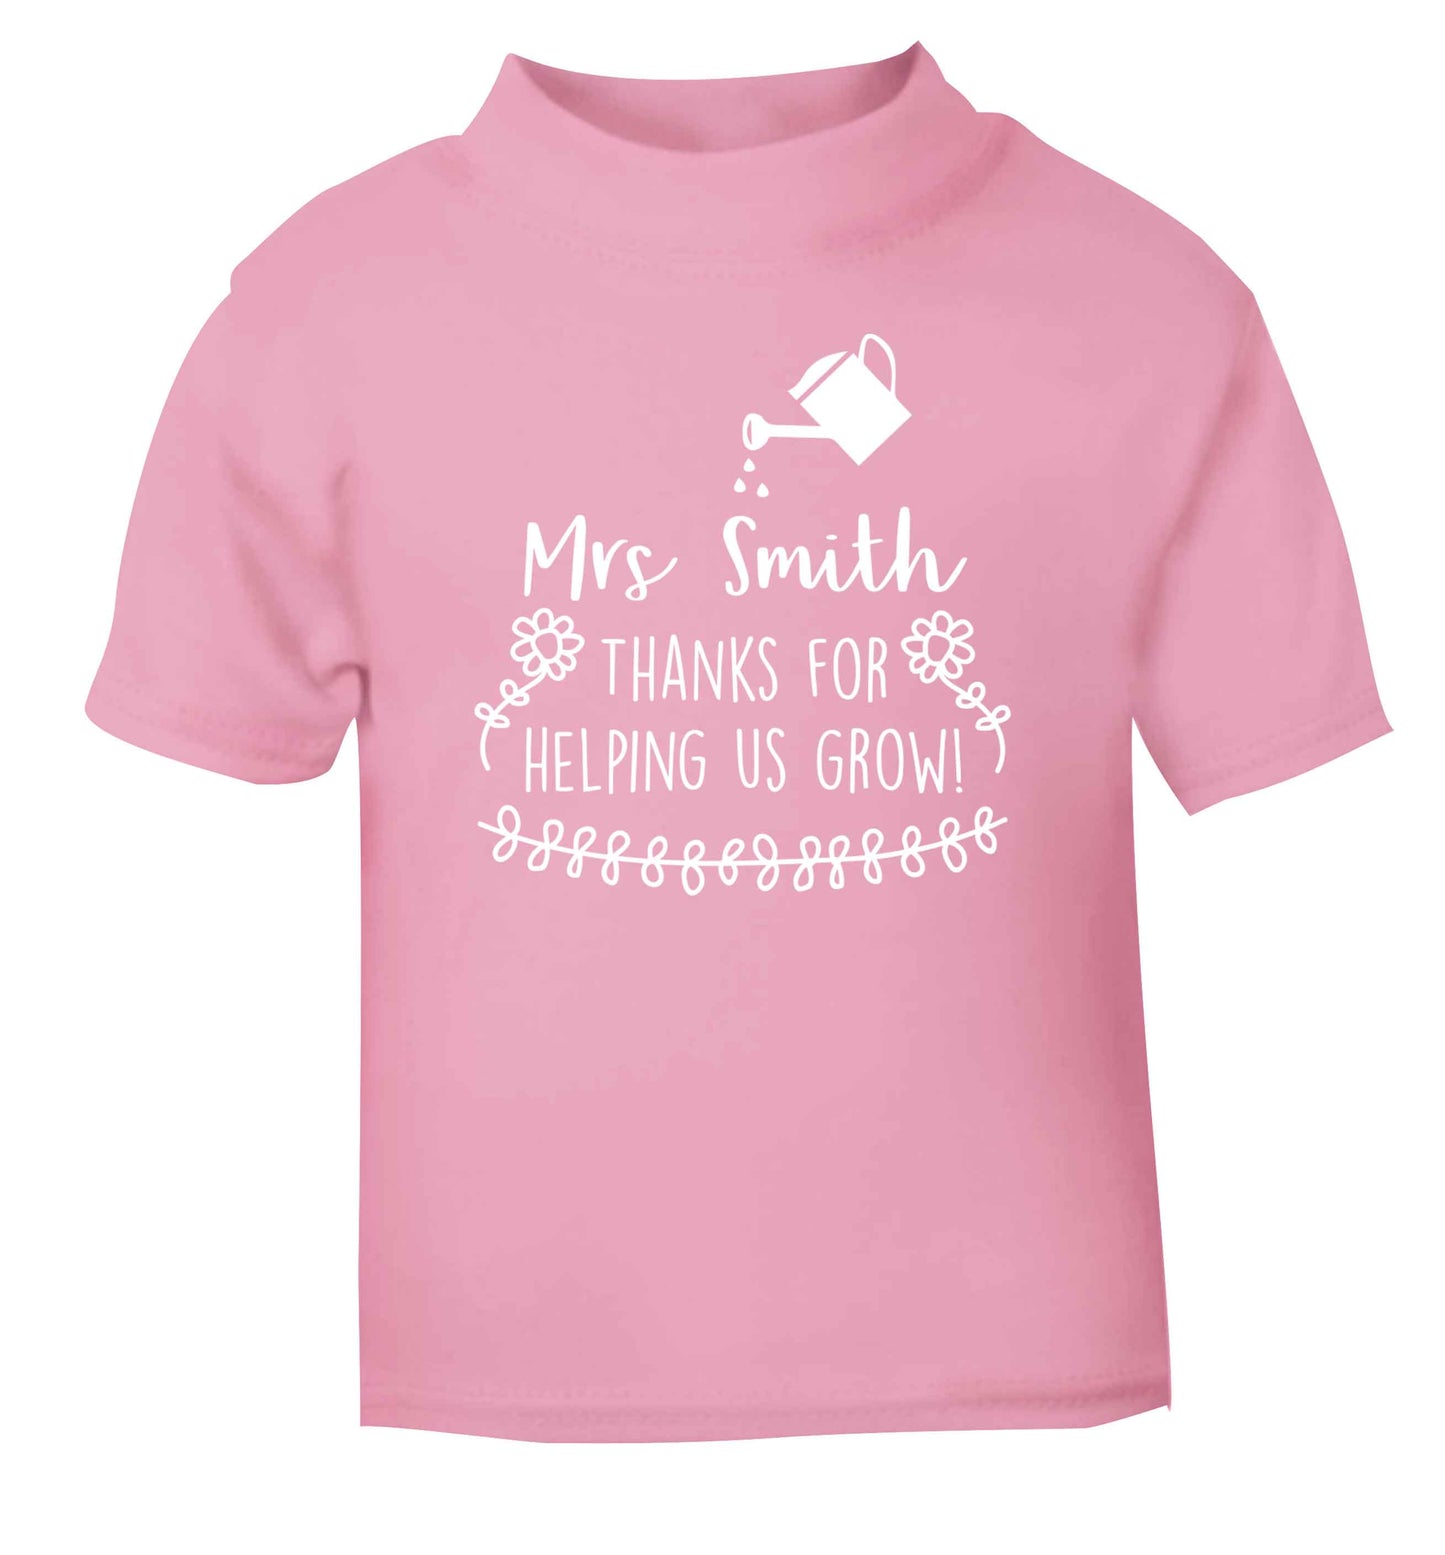 Personalised Mrs Smith thanks for helping us grow light pink Baby Toddler Tshirt 2 Years